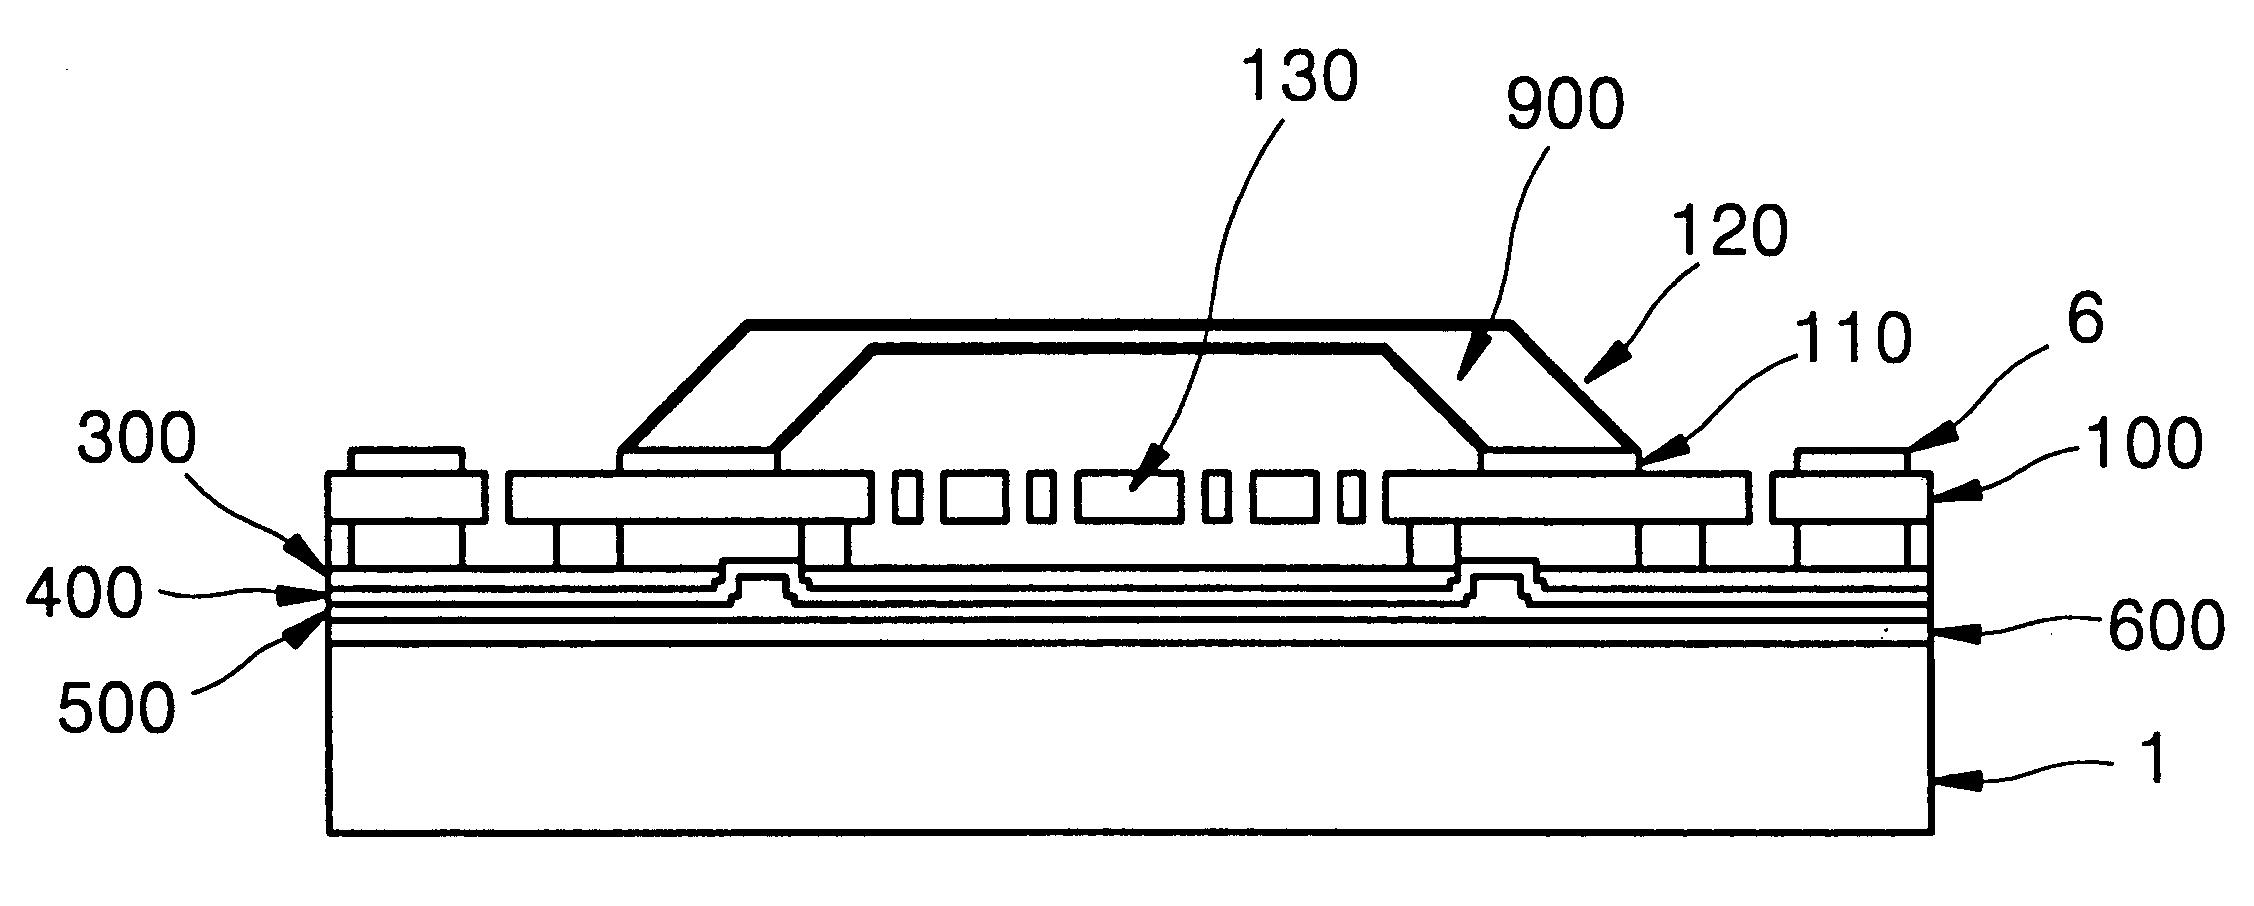 Method of fabricating micro electro mechanical system structure which can be vacuum-packed at wafer level